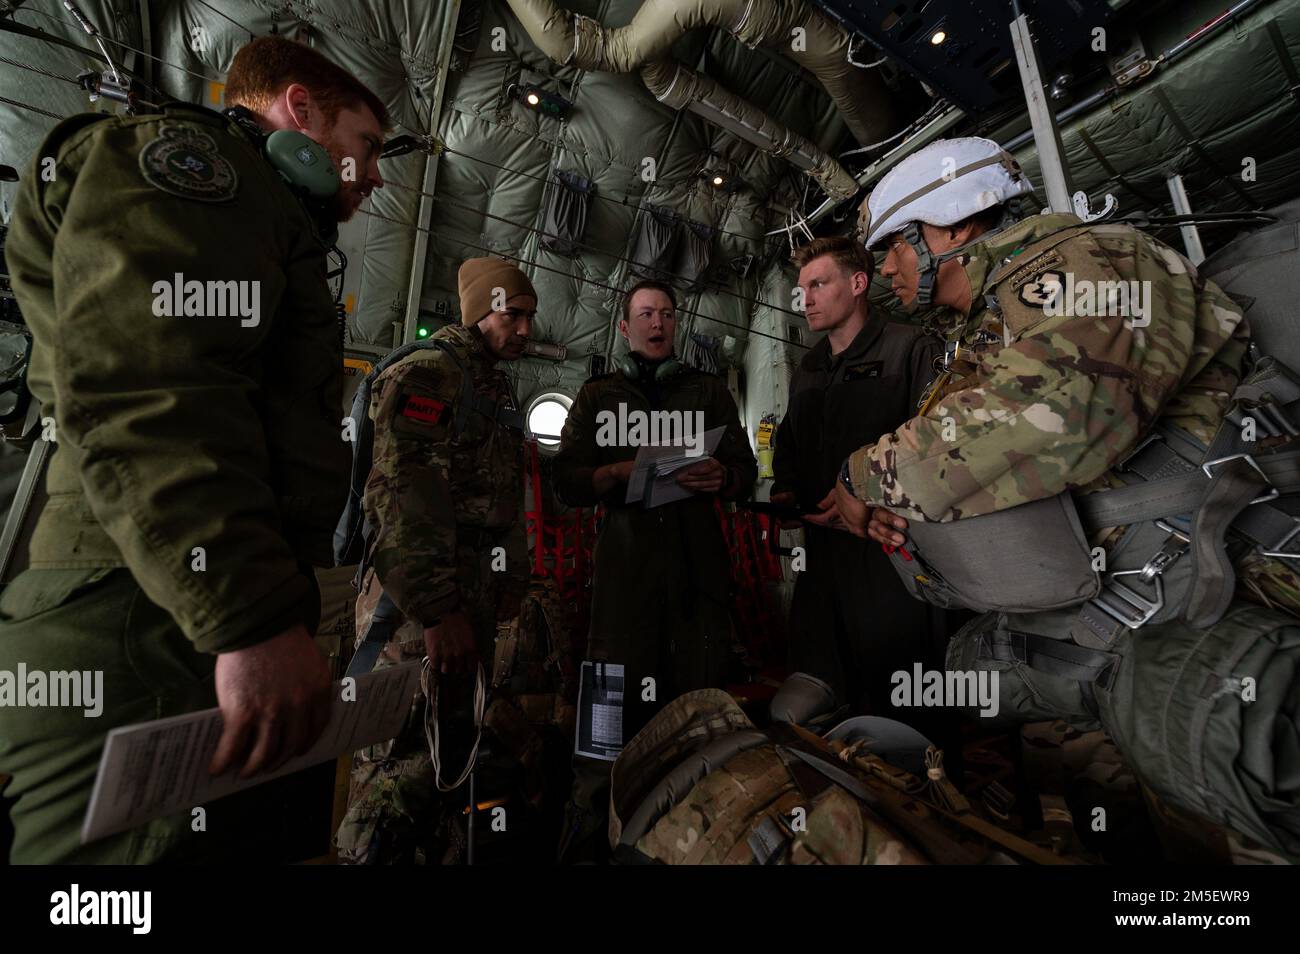 Royal Canadian Air Force Capt. Jake Balfe (center), an RCAF CC-130J Hercules aircraft first officer assigned to the 436 Transport Squadron, gives a mission brief to aircrew members and U.S. Army Soldiers, assigned to the 1st Squadron, 40th Cavalry Regiment, 4th Brigade combat team, 25th Infantry Division, U.S. Army Alaska, prior to jumping into Joint Pacific Multinational Readiness Center 22-02 on Joint Base Elmendorf-Richardson, AK, March 9, 2022. JPMRC 22-02 is the first Regional Combat Training Center (HS-CTC) rotation in Alaska. It focuses on Large Scale Combat Operations (LSCO) and is a C Stock Photo